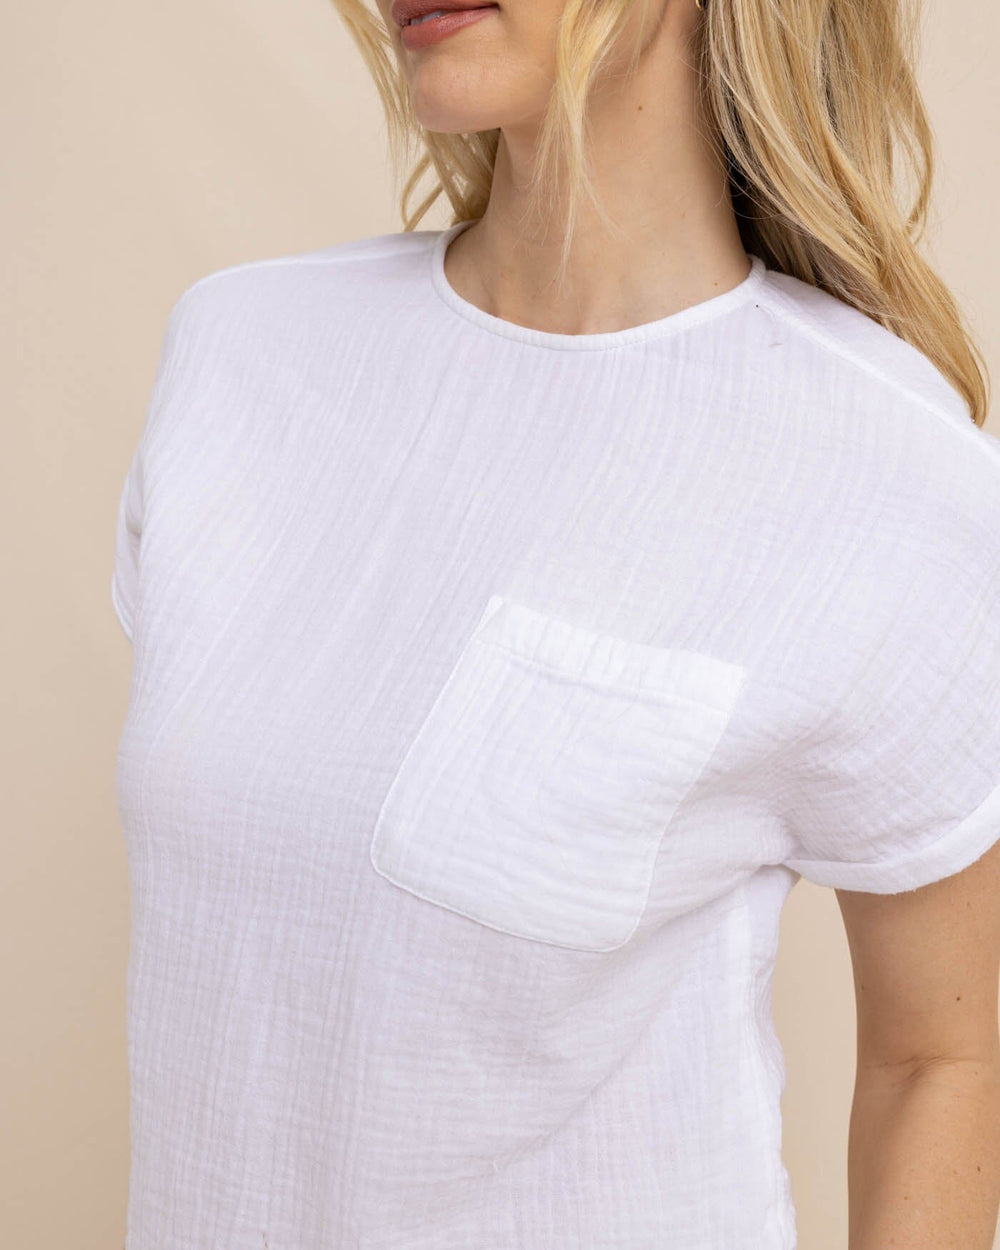 The detail view of the Southern Tide Imogen Double Cloth Top by Southern Tide - Classic White